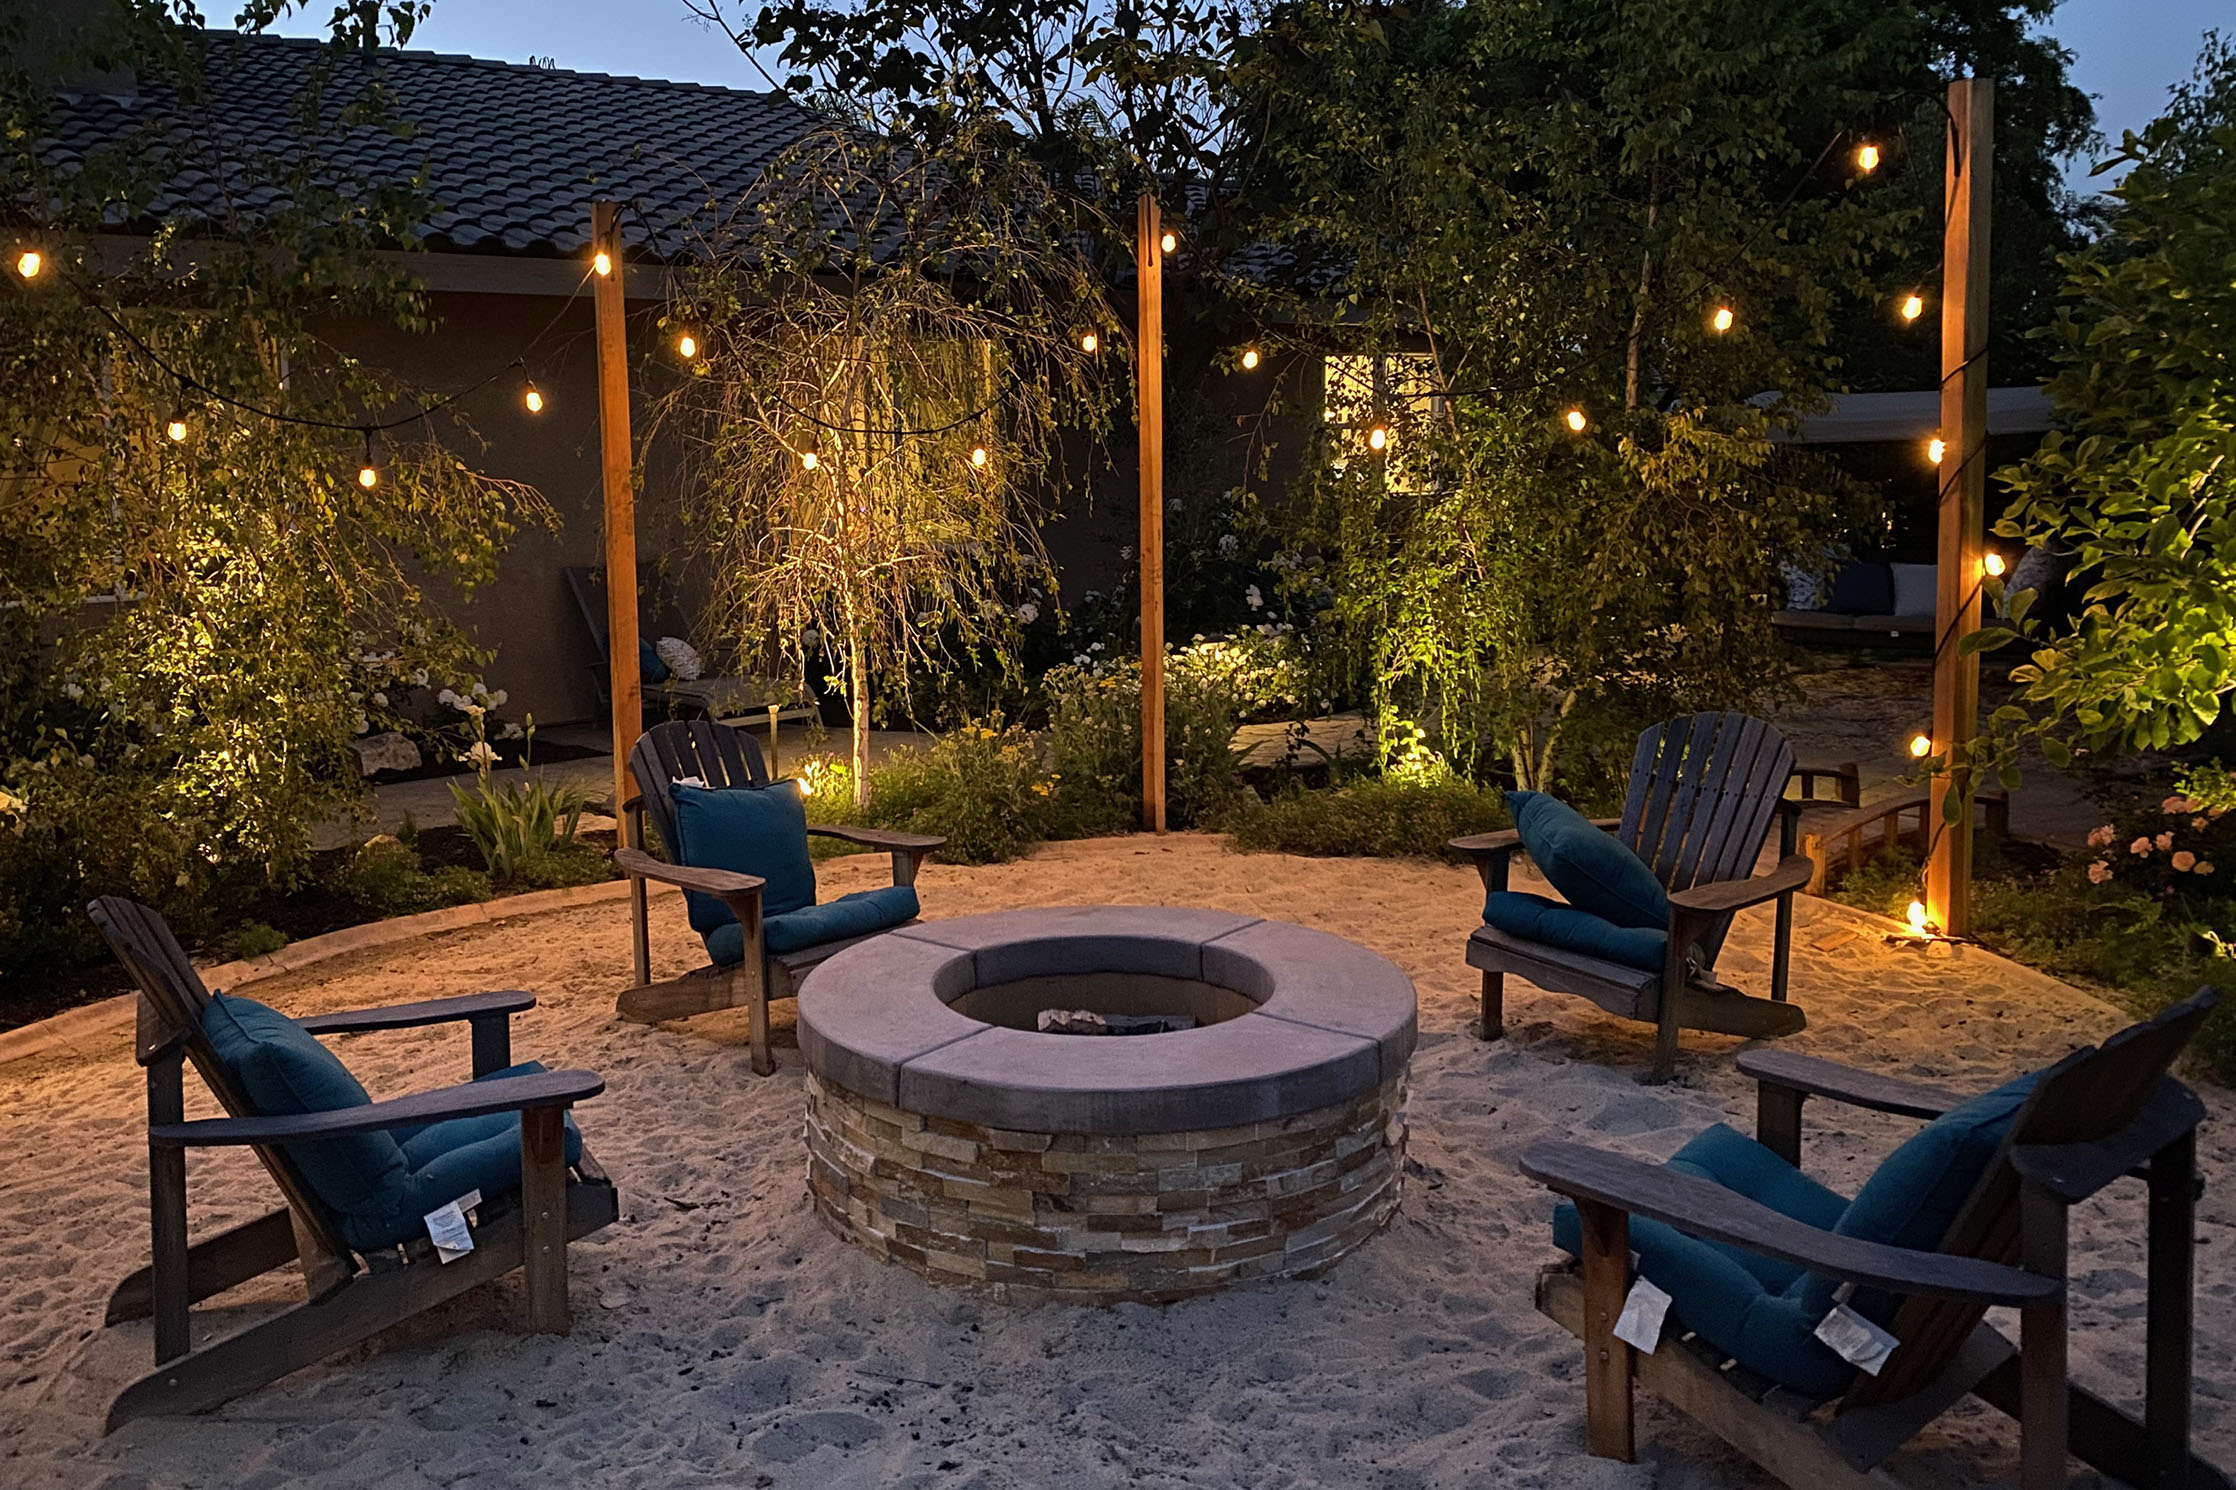 Outdoor Fire pit with string lights